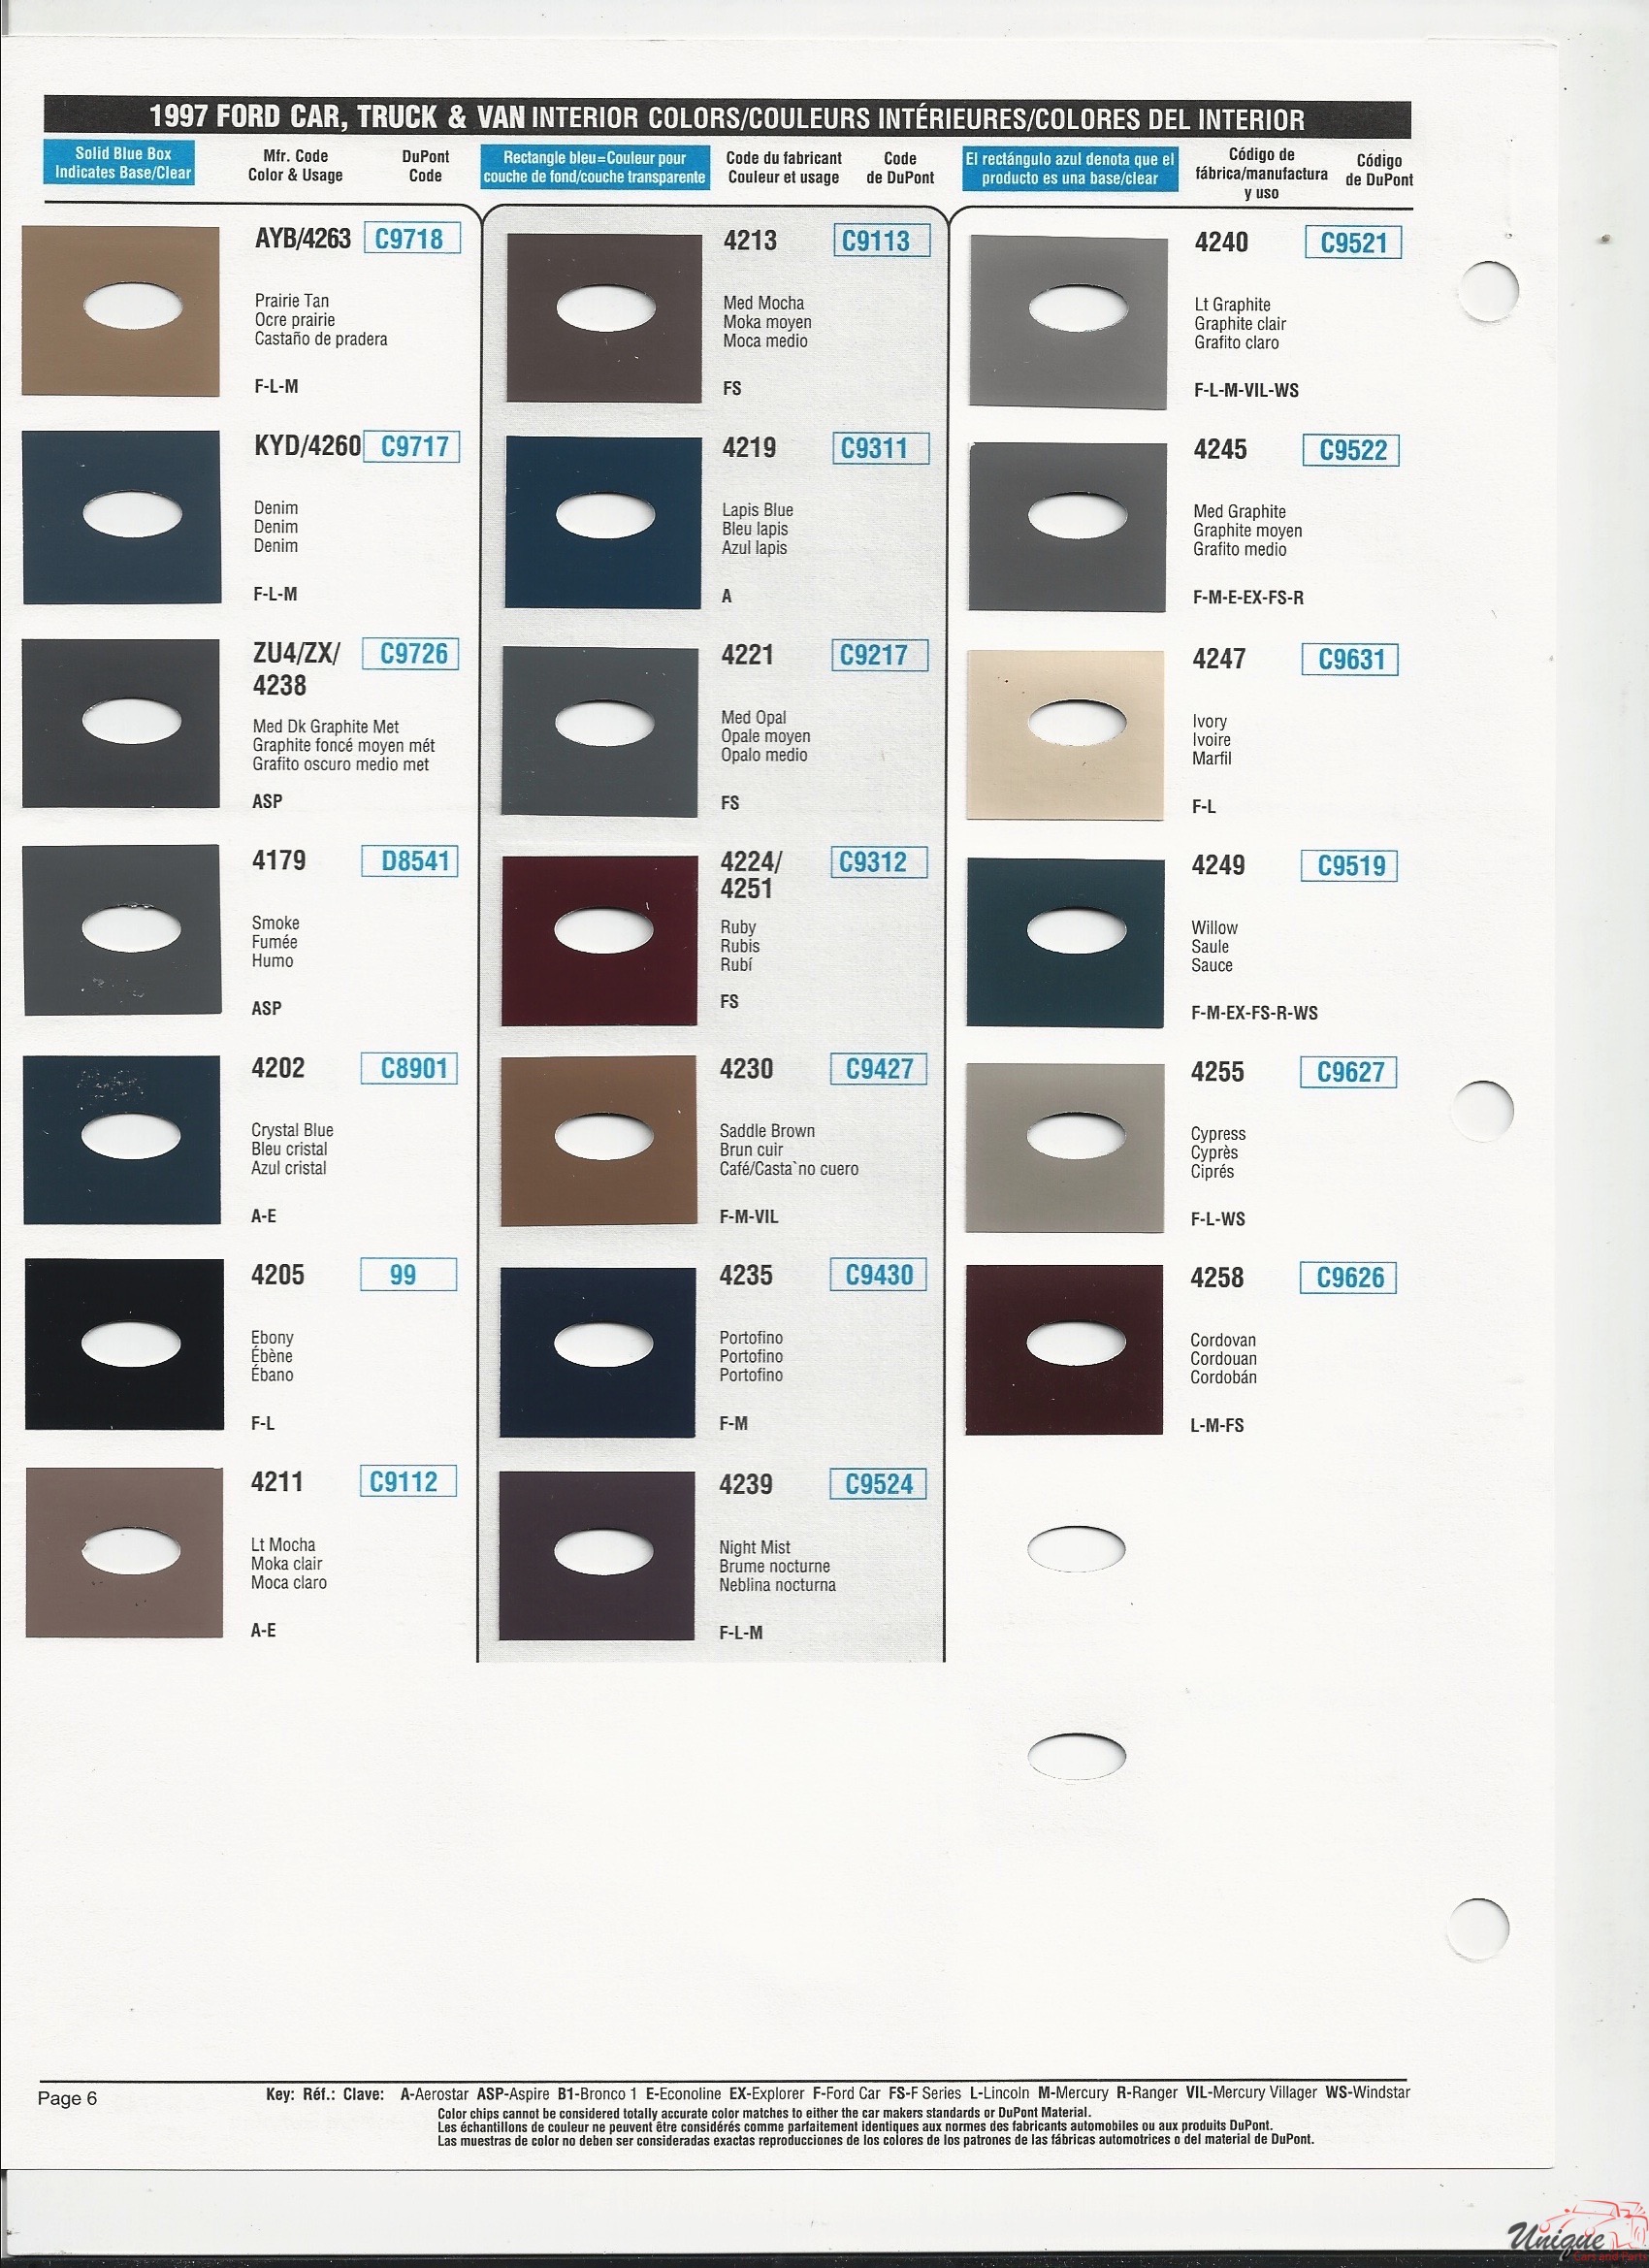 1997 Ford-5 Paint Charts